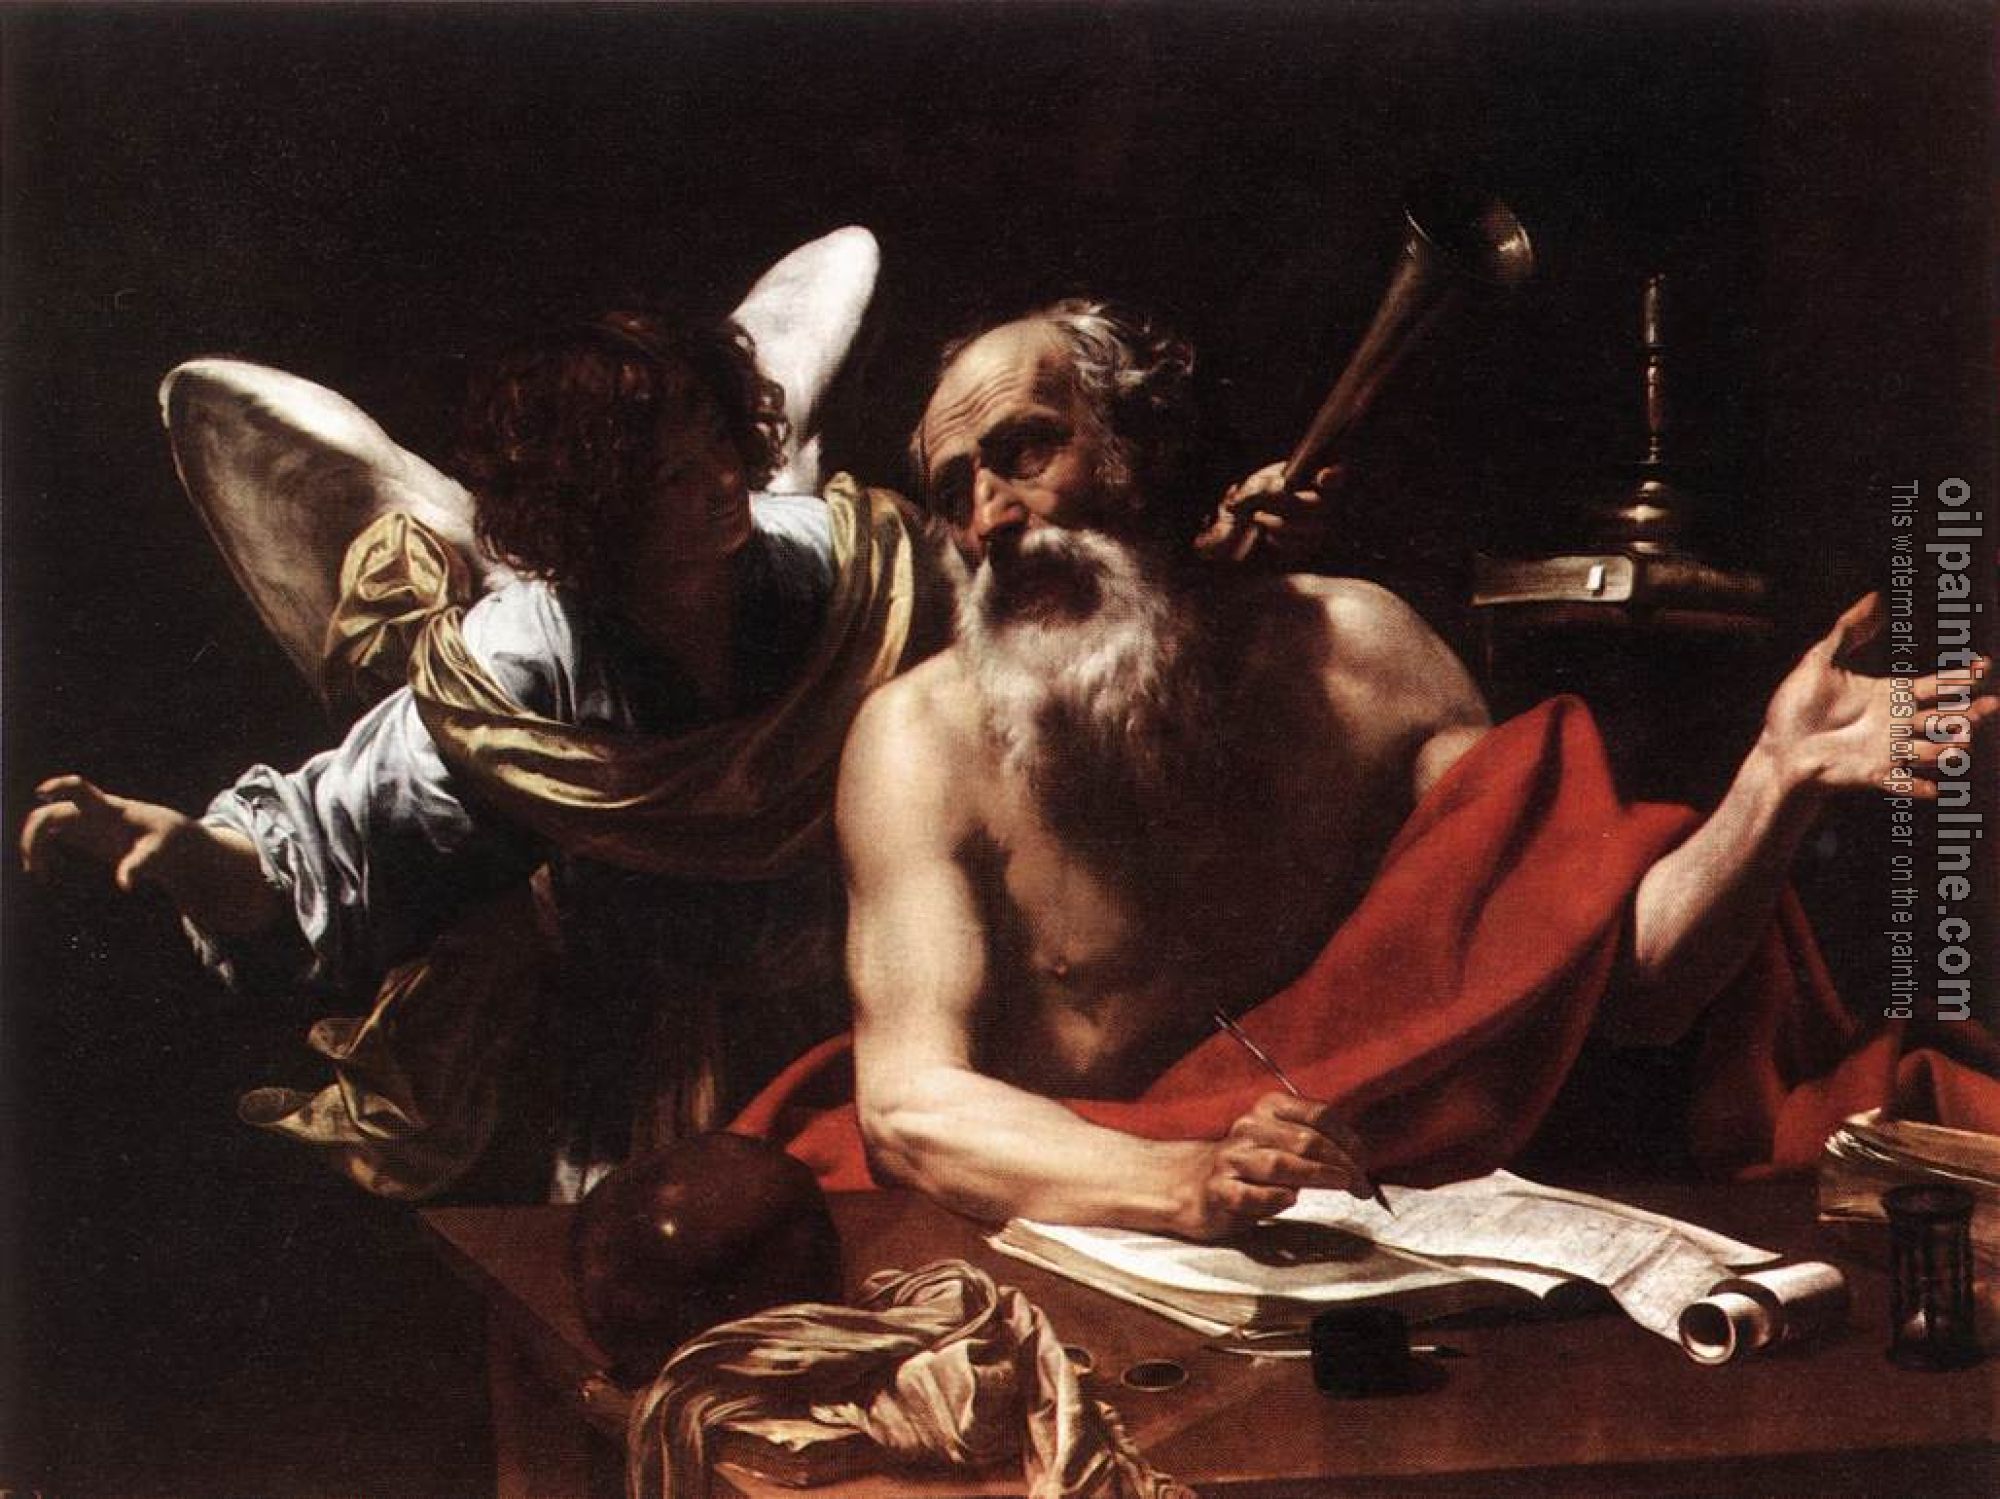 Vouet, Simon - St Jerome and the Angel